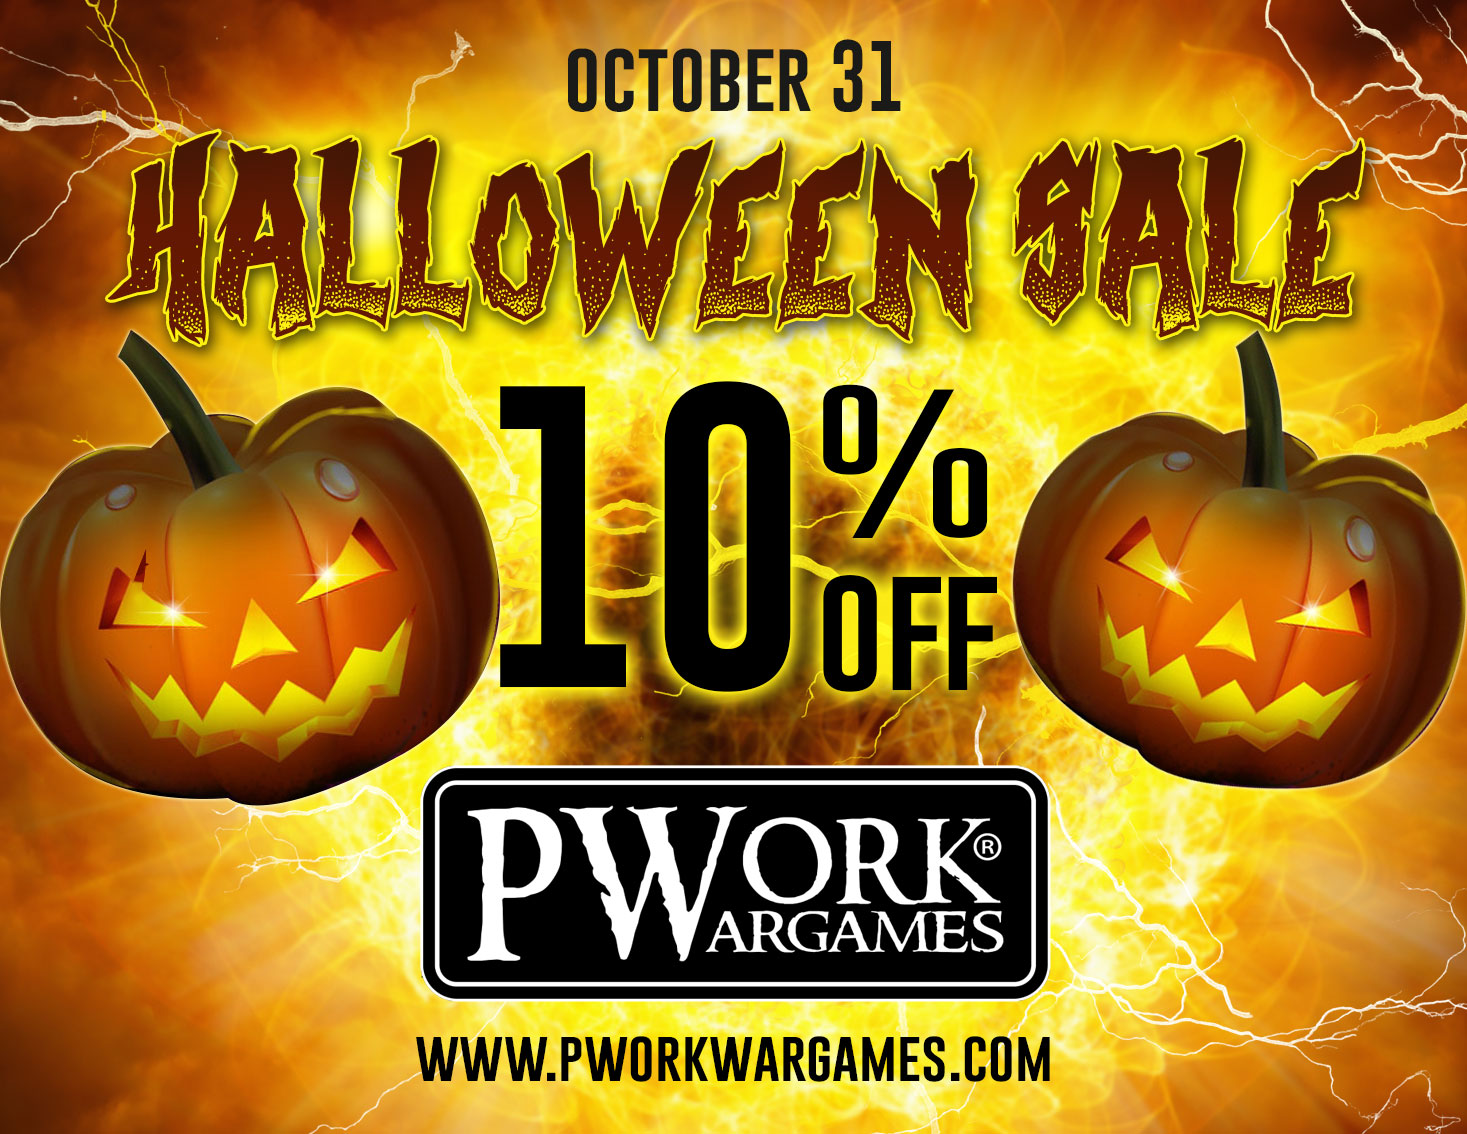 PWORK WARGAMES HALLOWEEN! 10% OFF ALL PRODUCTS!